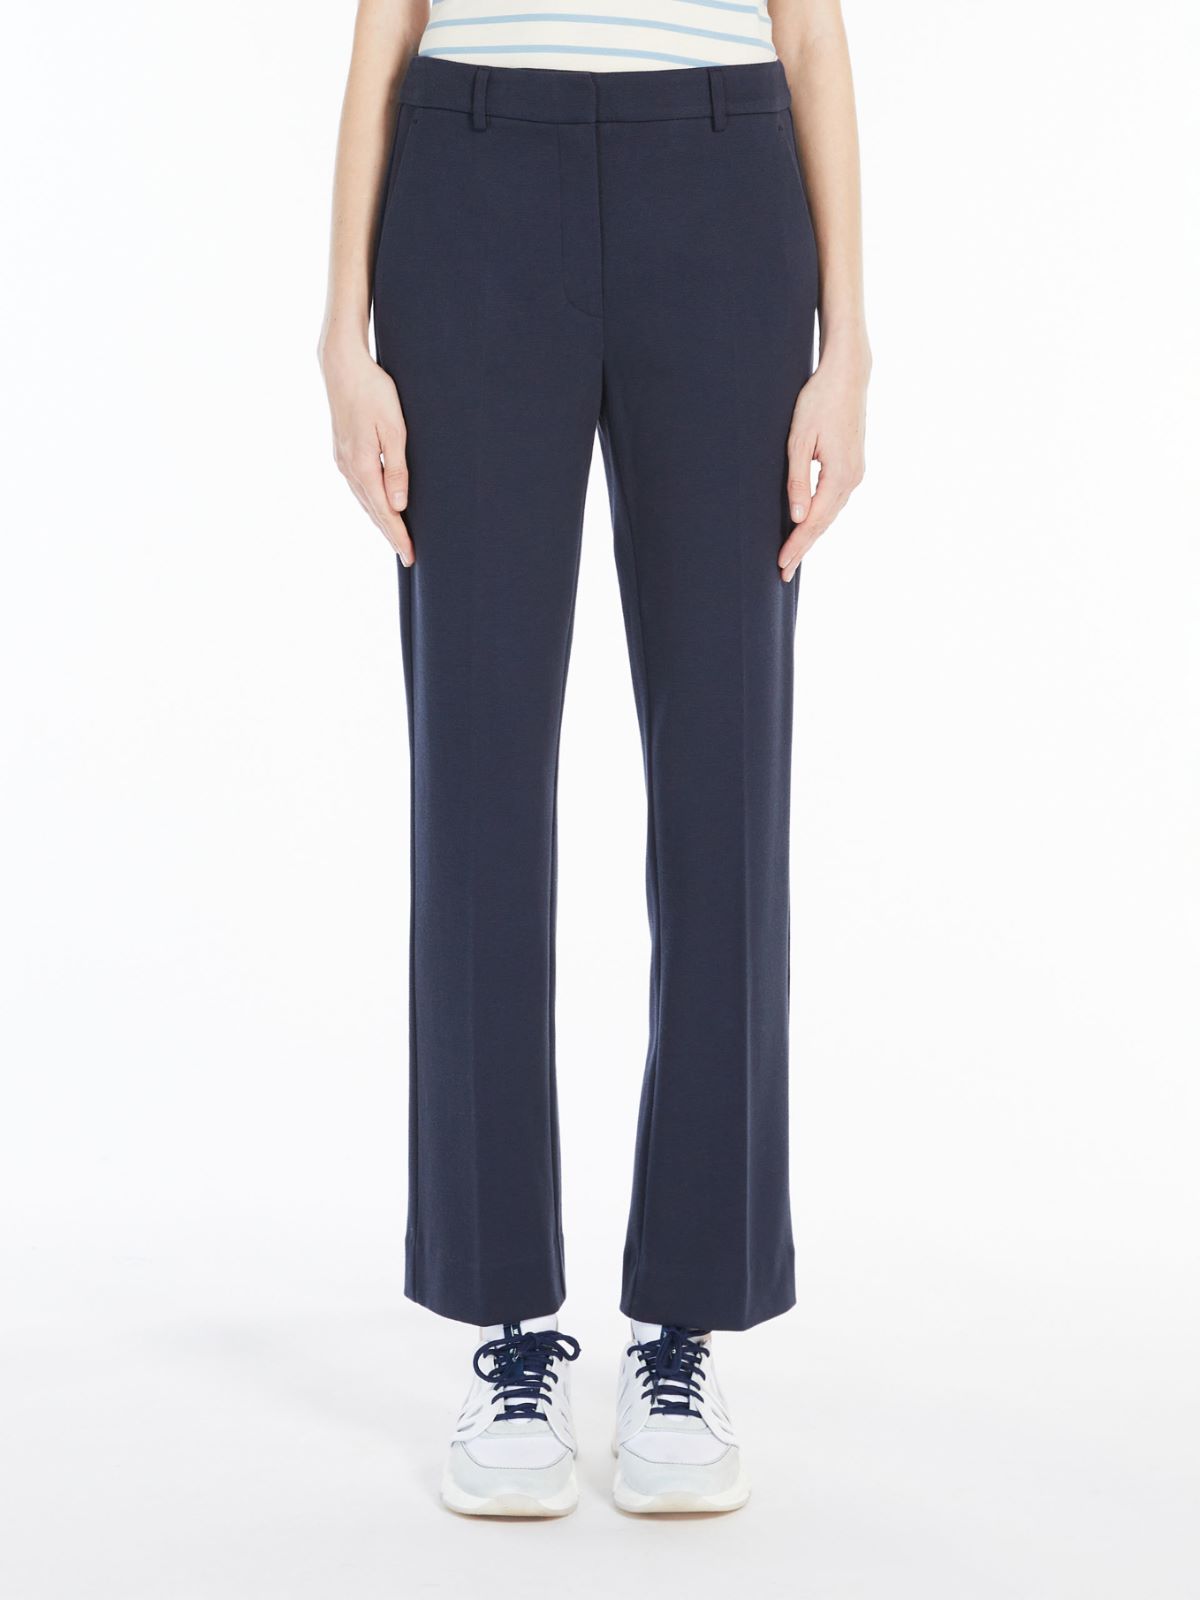 Jersey trousers - NAVY - Weekend Max Mara - 2